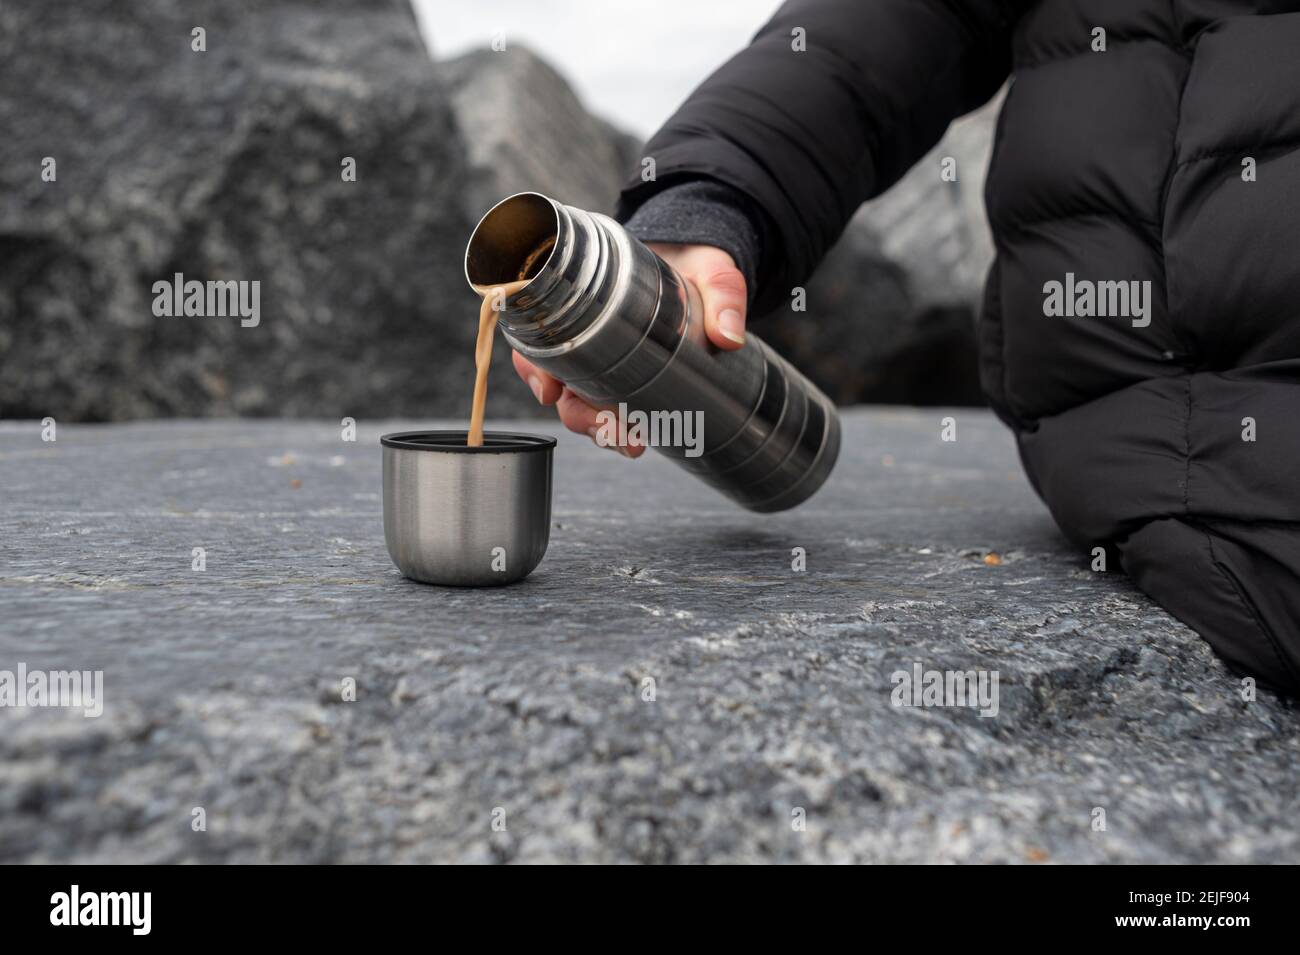 https://c8.alamy.com/comp/2EJF904/cropped-image-of-a-woman-sitting-on-rocks-holding-thermos-pours-a-warm-drink-into-a-cup-and-taking-a-break-while-hiking-in-nature-2EJF904.jpg